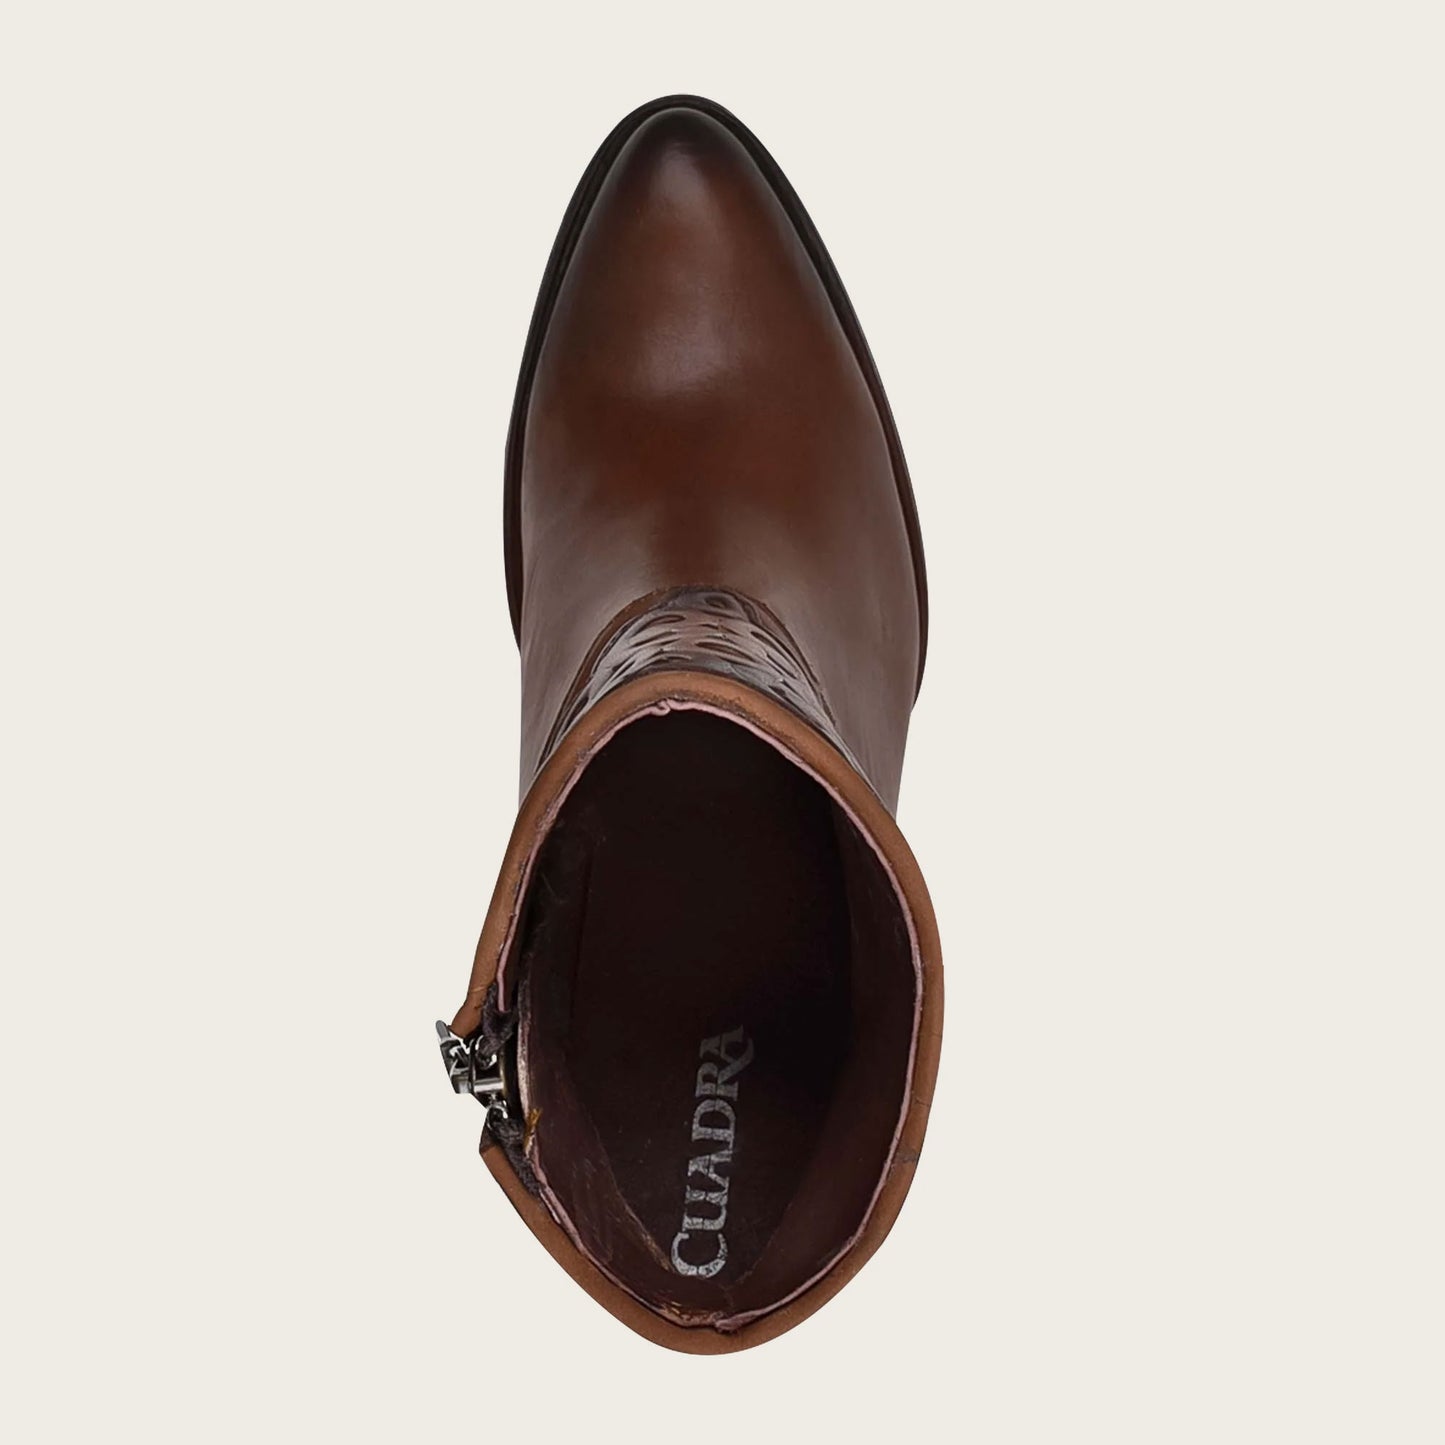 Stylish and versatile brown leather bootie with a sleek design, perfect for any occasion.